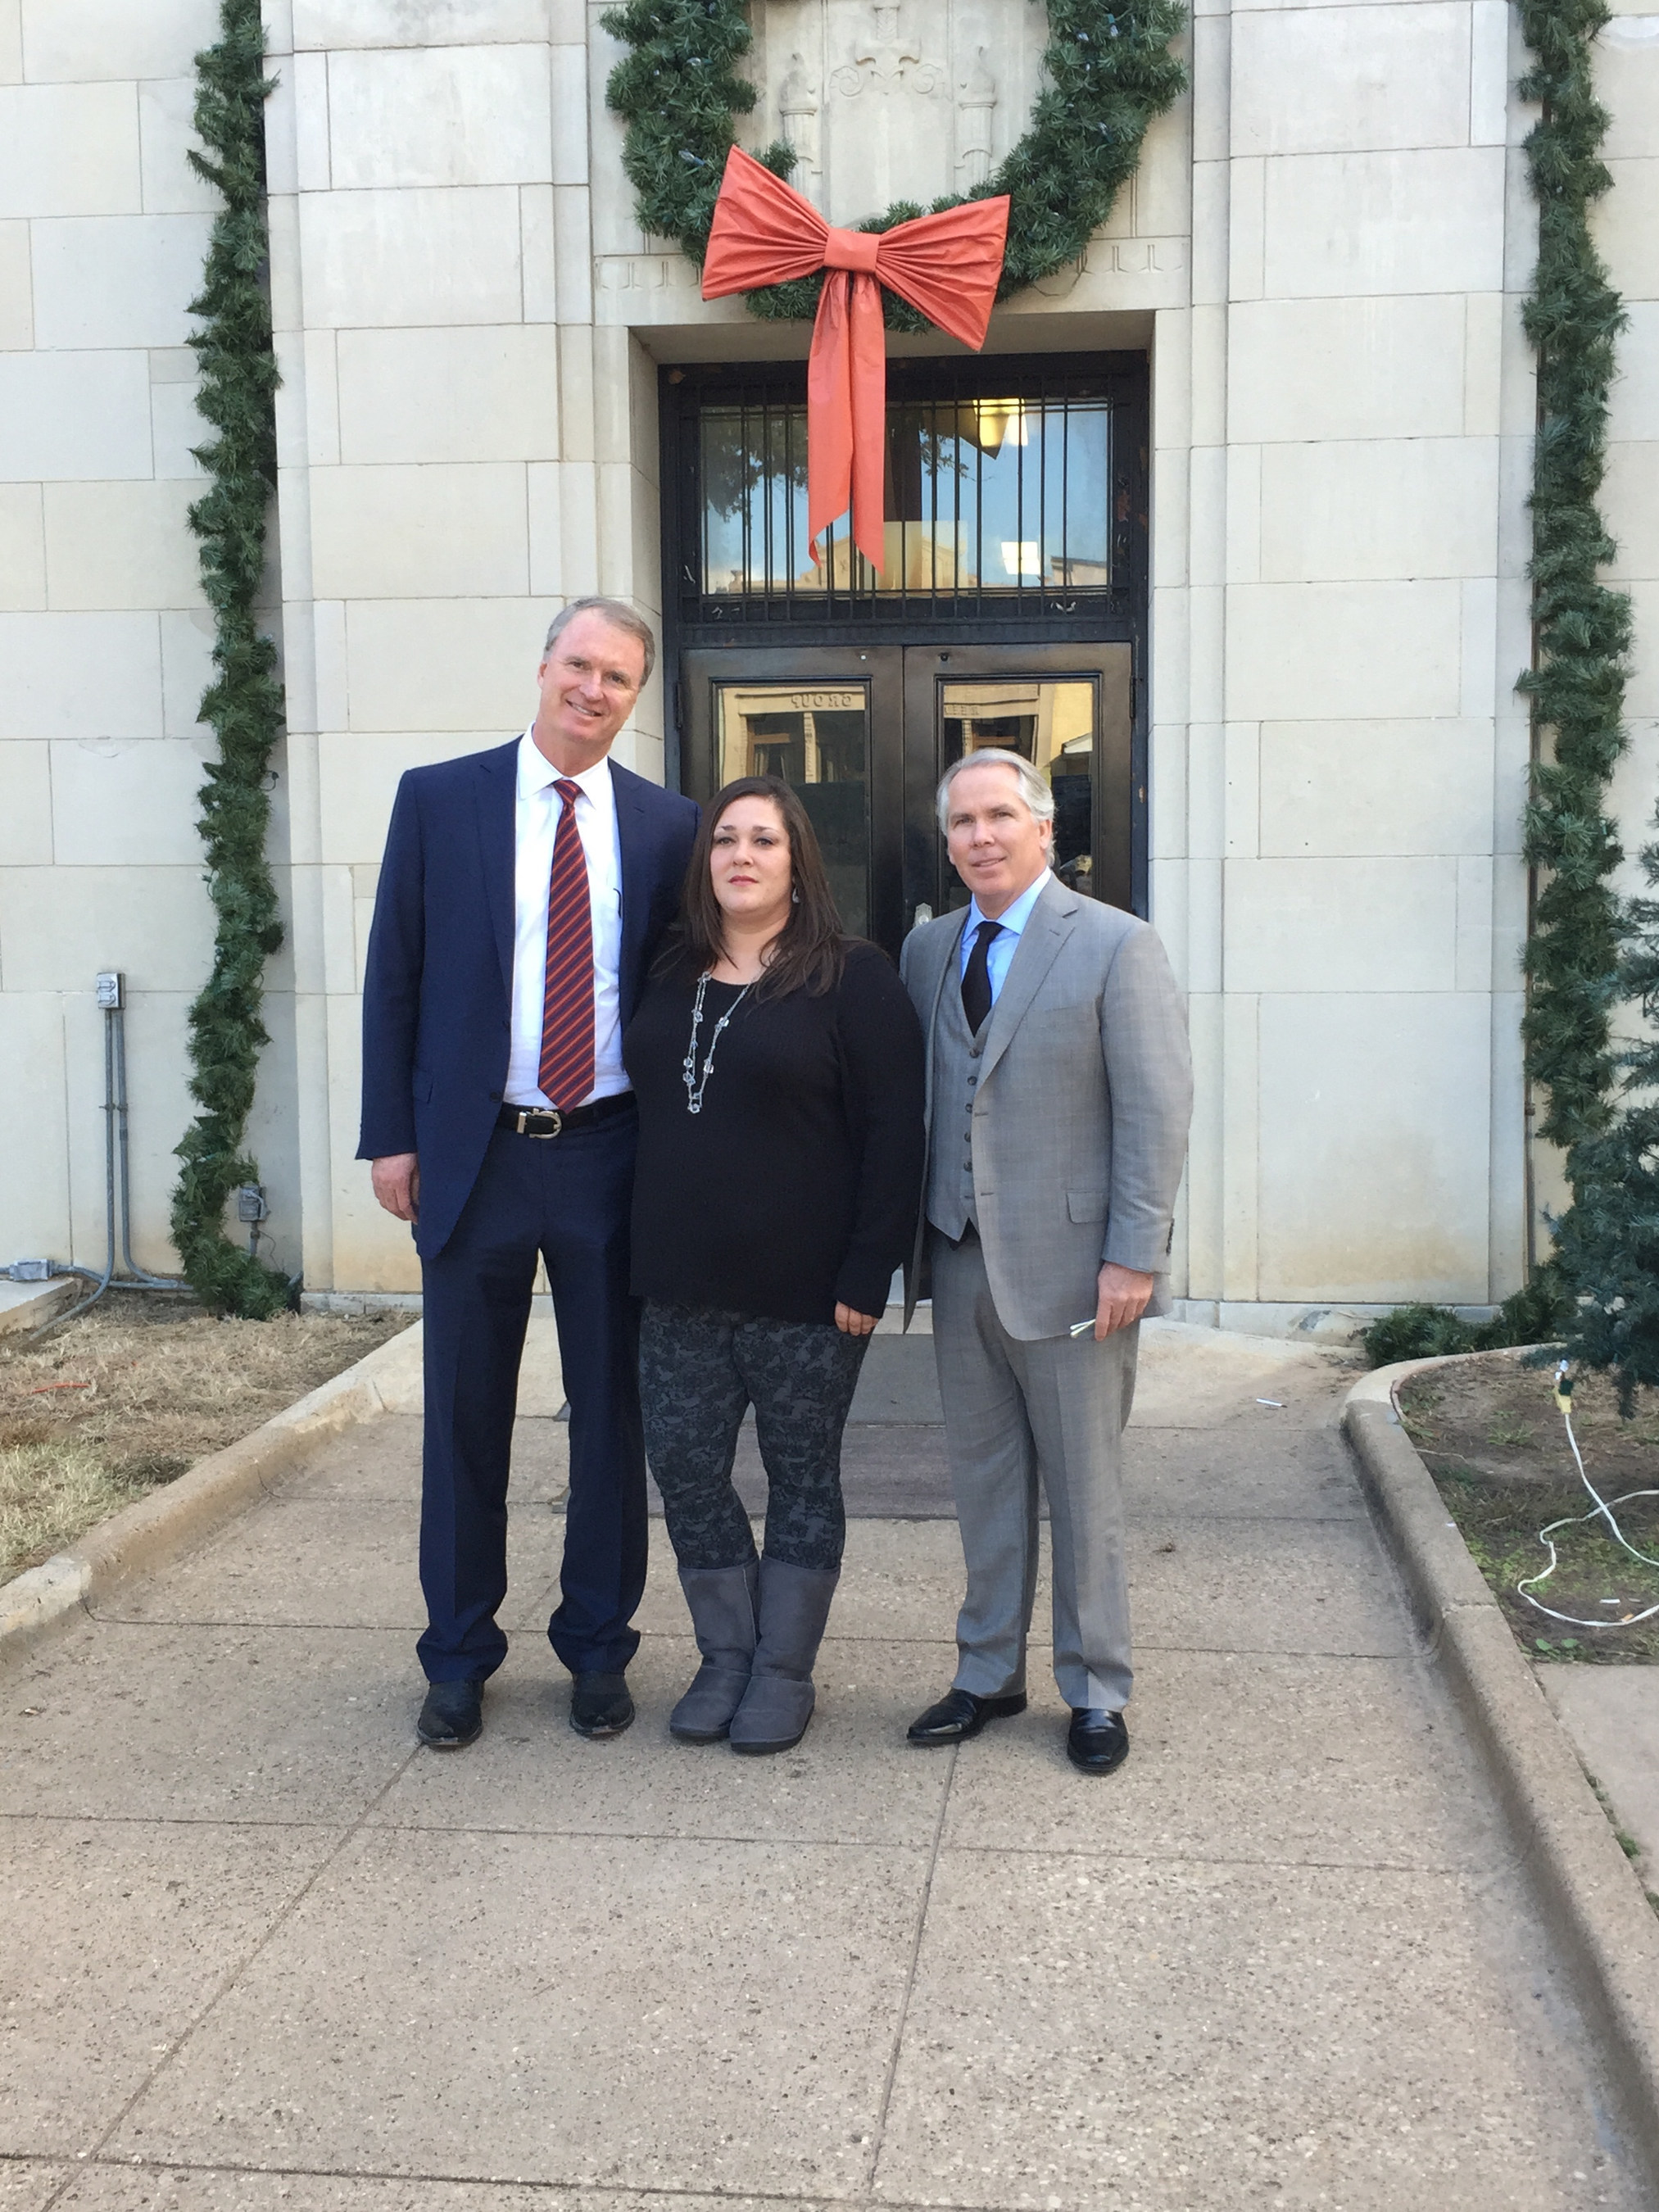 Candice Anderson and her attorneys Bob Hilliard and Thomas J. Henry